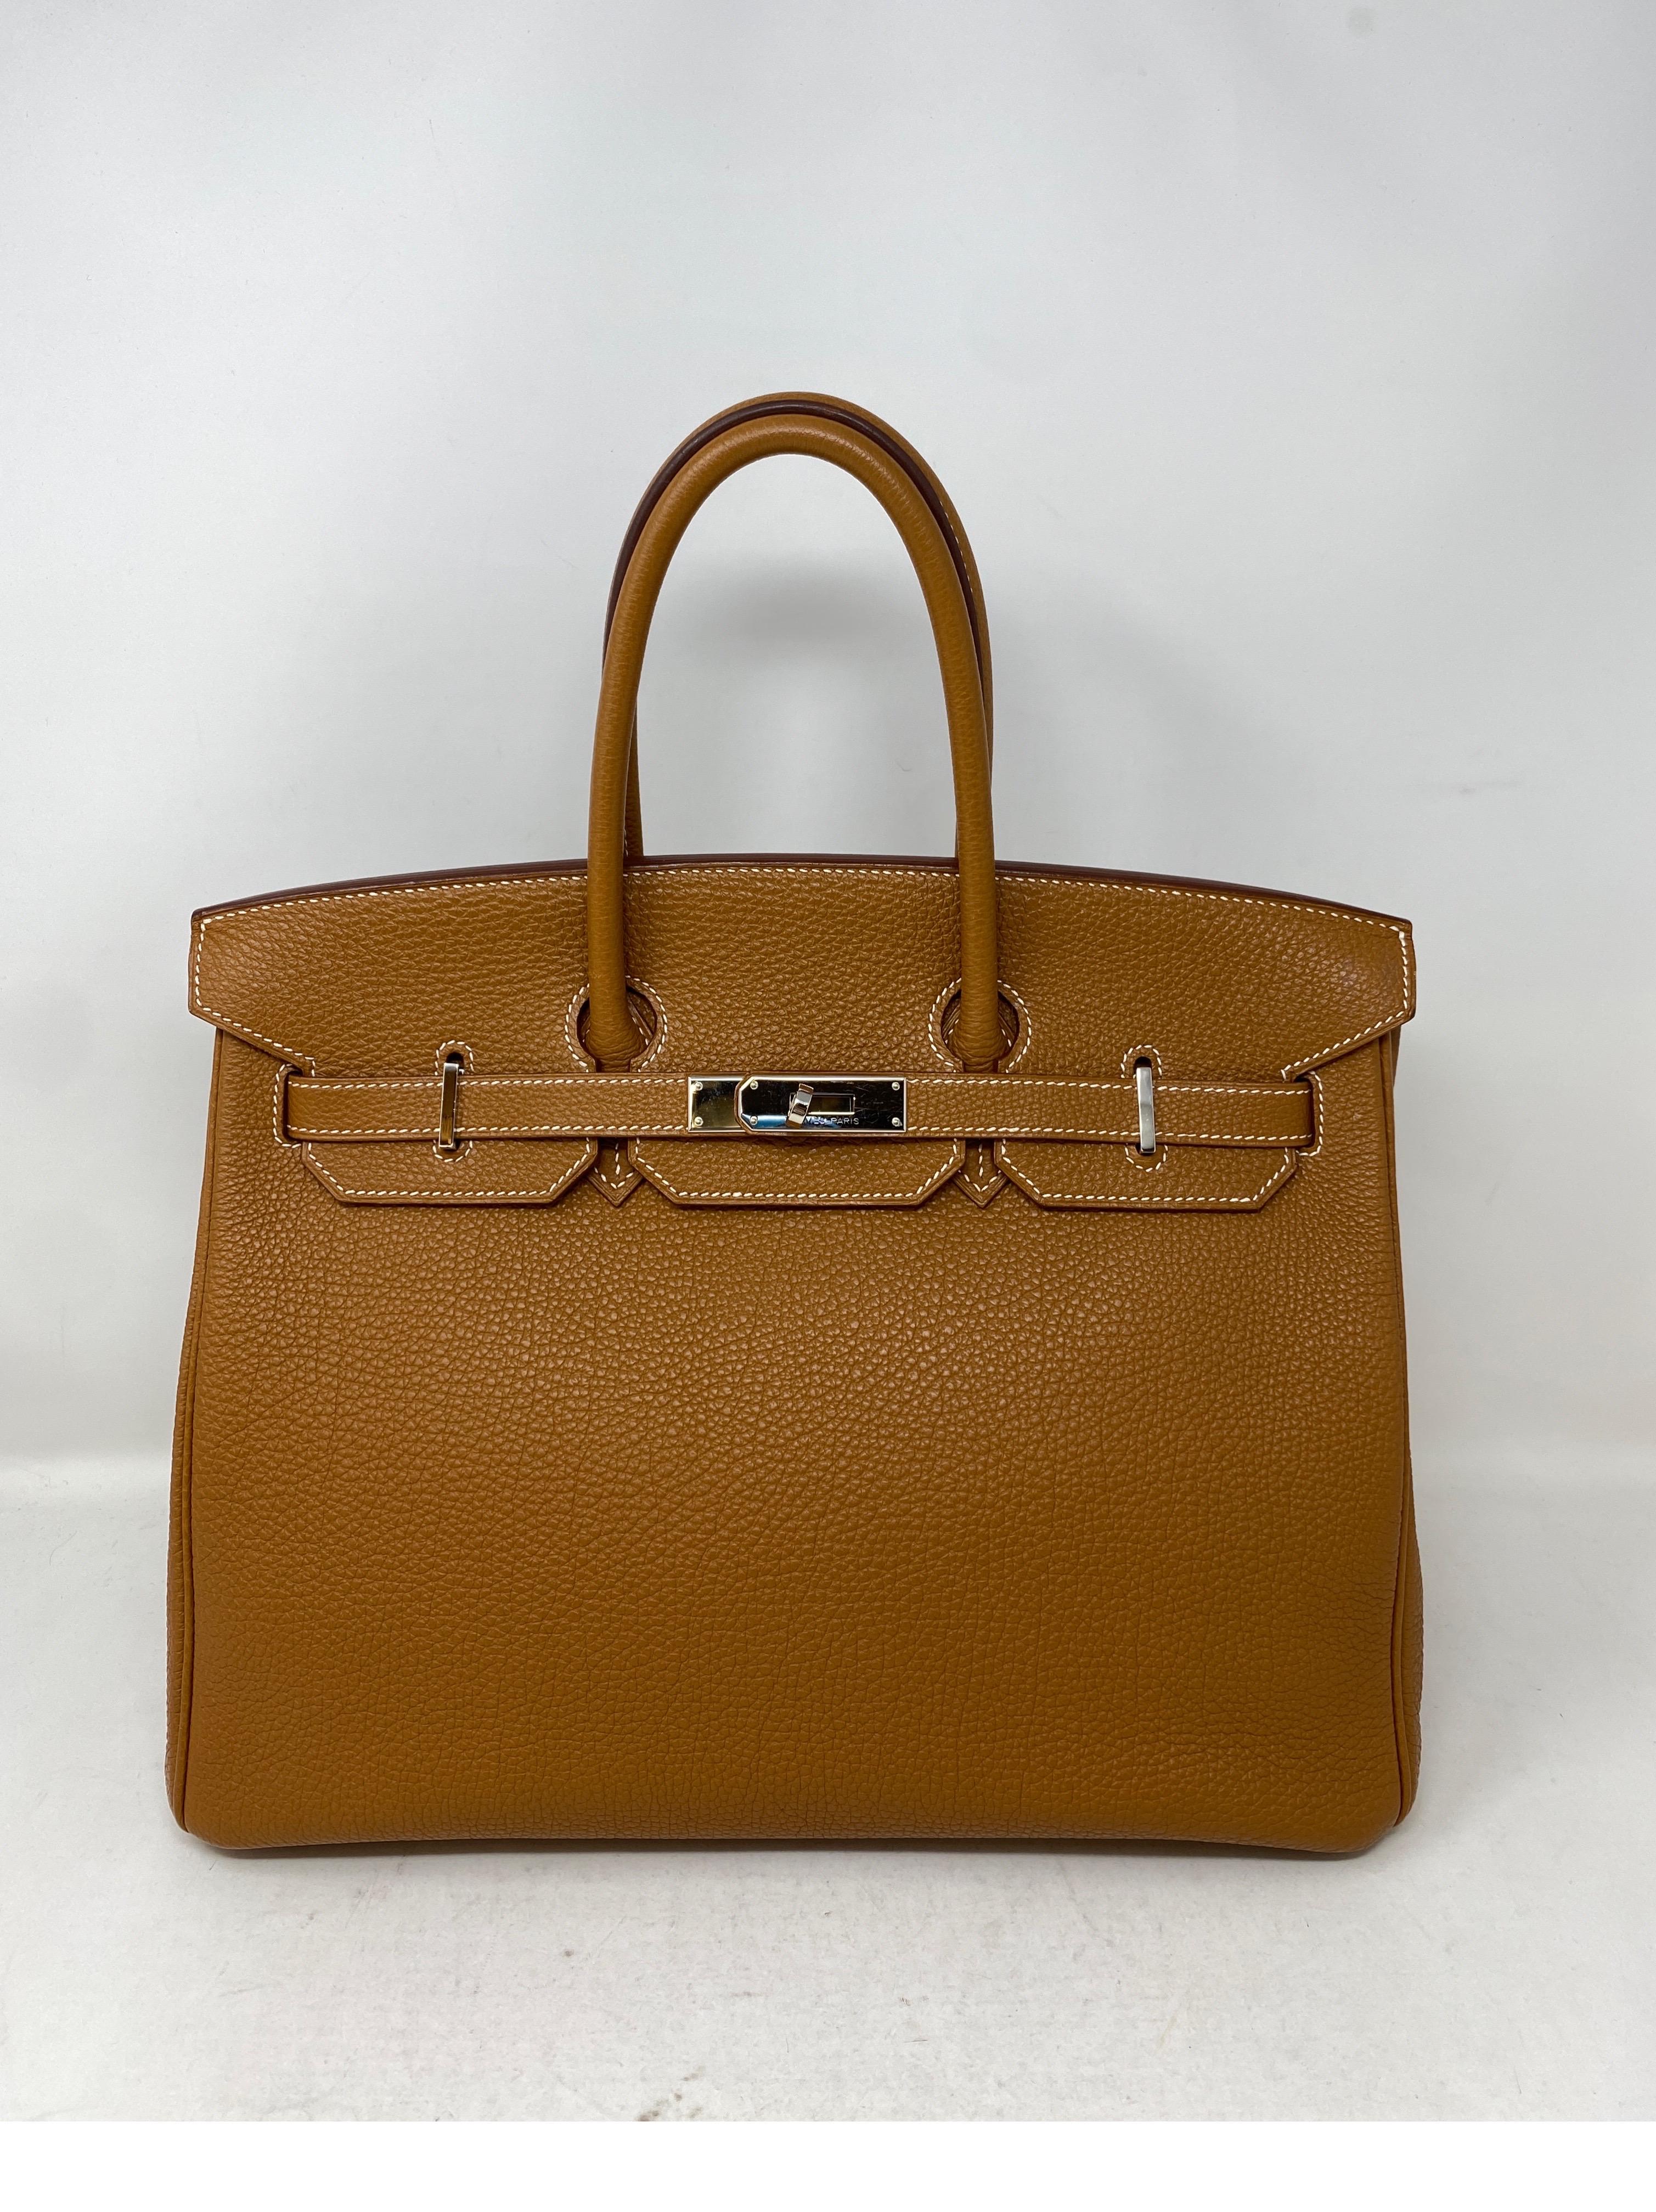 Hermes Gold Birkin 35 Bag. Gold tan leather color with palladium hardware. The most classic Birkin Bag. Togo leather. Excellent condition like new. Includes clochette, lock, keys and dust cover. Guaranteed authentic. Don't miss out on this one. 